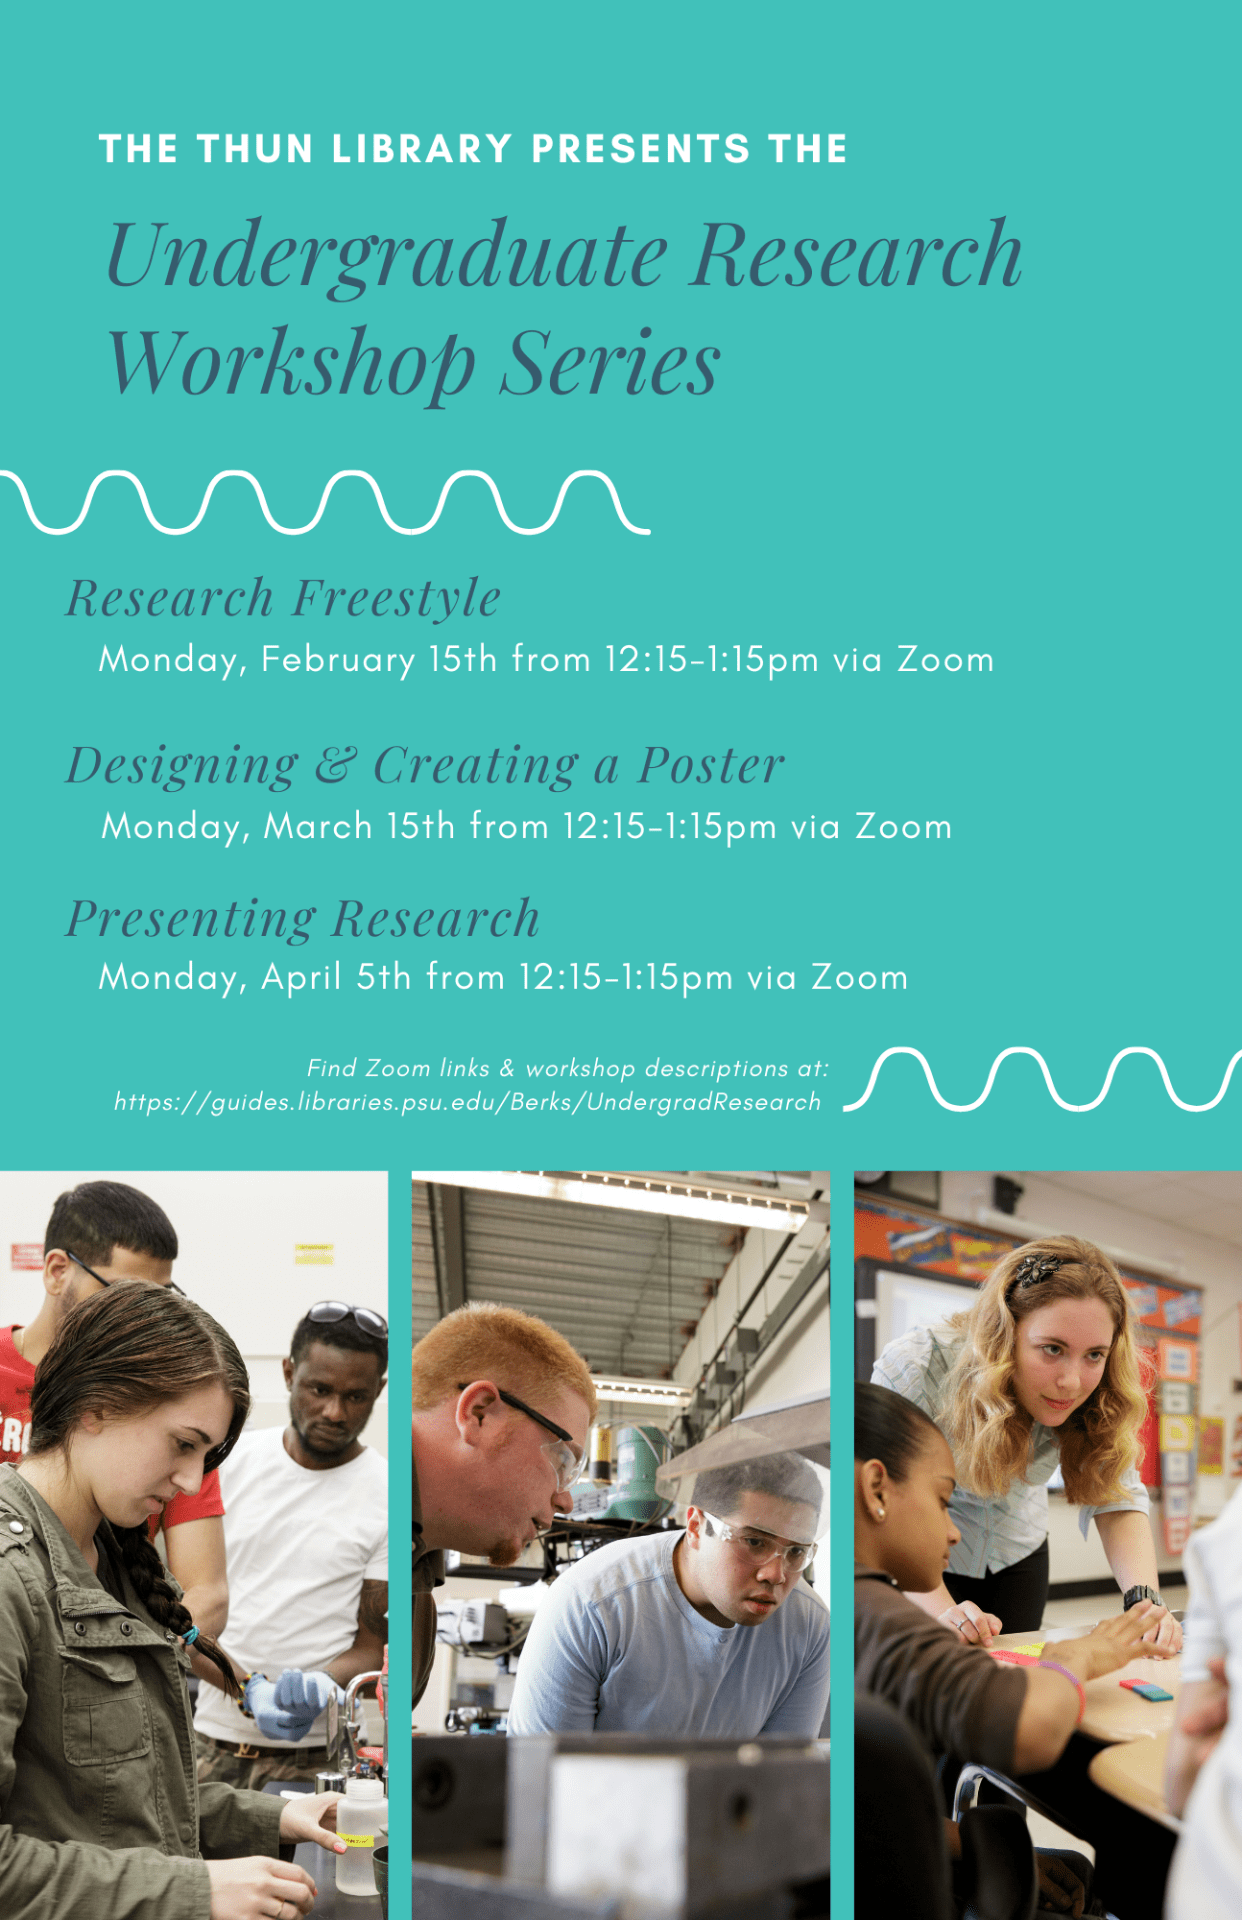 The Thun Library presents the Undergraduate Research Workshop Series. Research Freestyle, Monday, February 15th from 12:15-1:15pm via Zoom; Designing & Creating a Poster, Monday, March 15th from 12:15-1:15pm via Zoom; Presenting Research, Monday, April 5th from 12:15-1:15pm via Zoom. Find Zoom links & workshop descriptions at: https://guides.libraries.psu.edu/Berks/UndergradResearch 